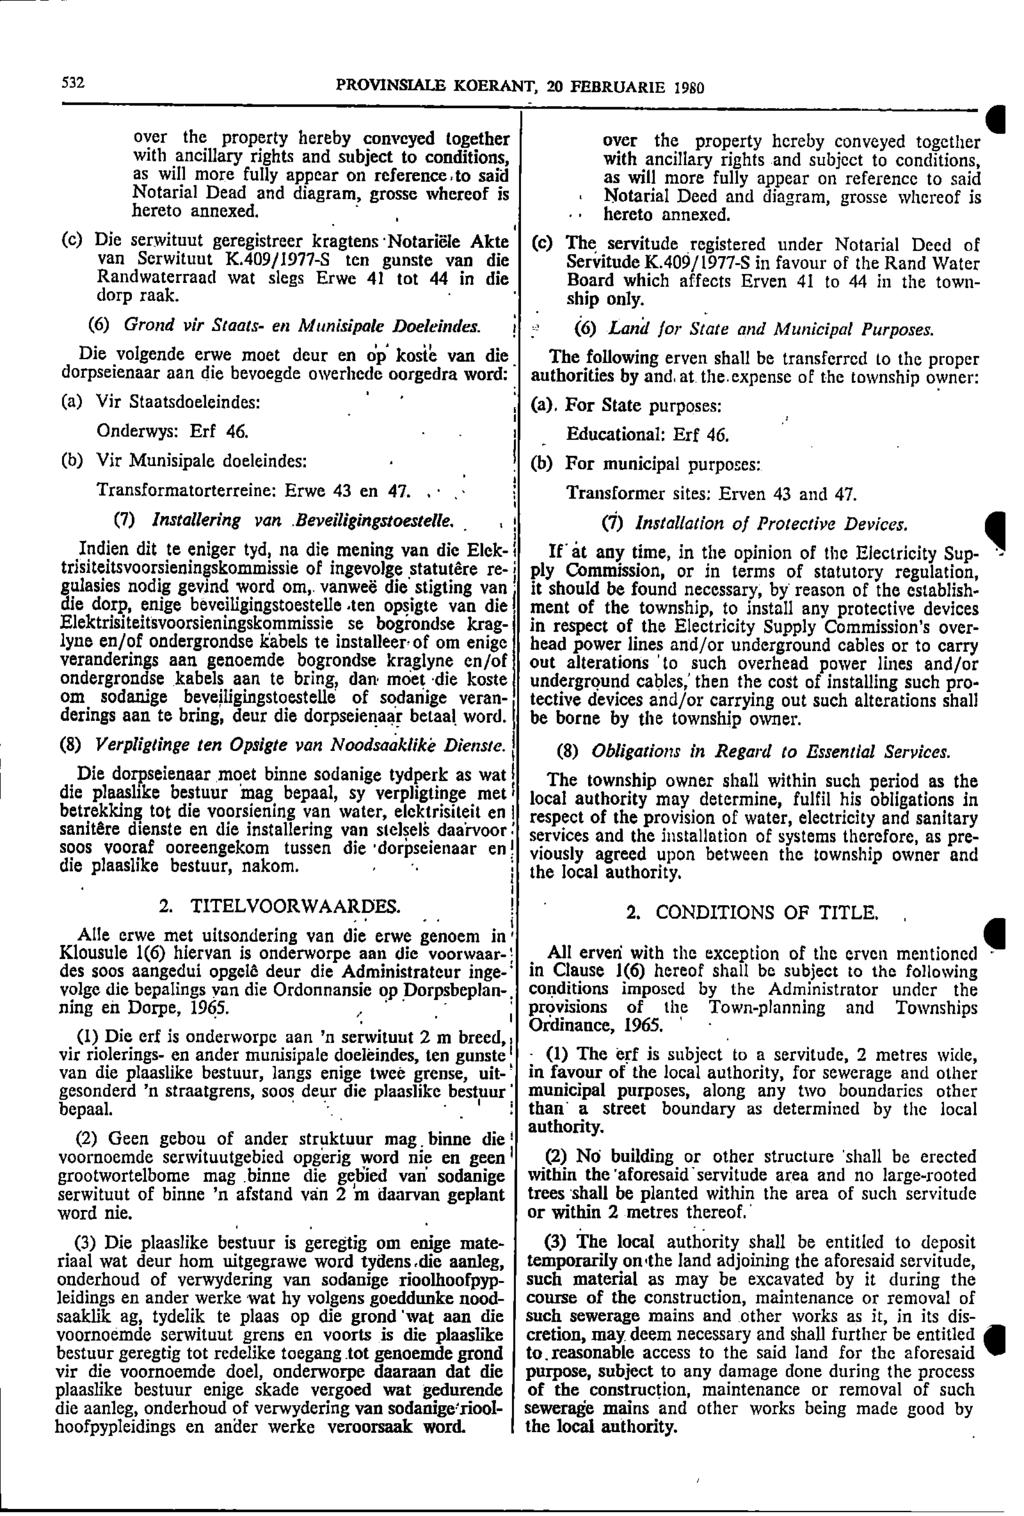 532 PROVNSALE KOERANT 20 FEBRUARE 1980 over the property hereby conveyed together over the property hereby conveyed together with ancillary rights and subject to conditions with ancillary rights and